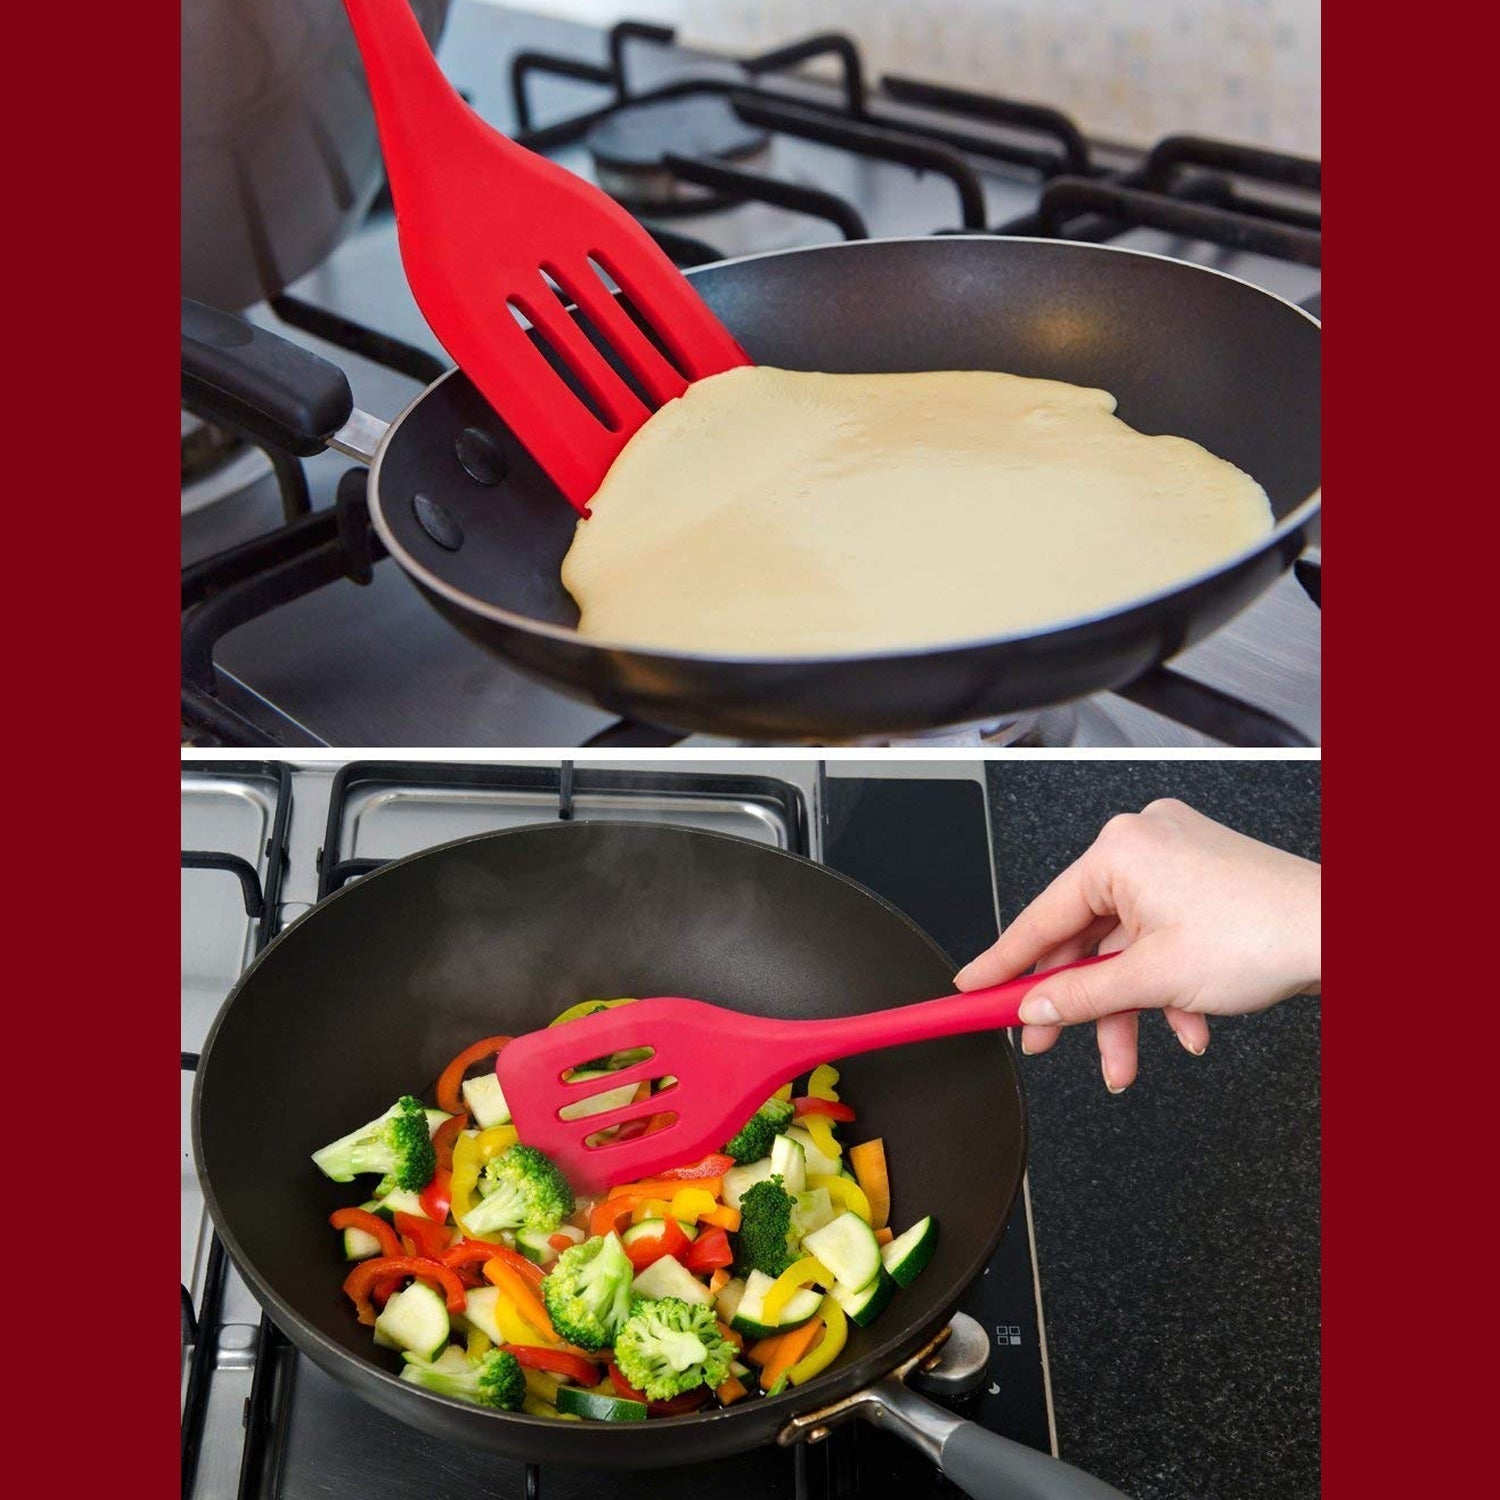 5445 Silicone Spatula | Non-Stick | Heat, Stain and Odor Resistant | Easy to Clean and Dishwasher Safe | Seamless Kitchen Utensil for Cooking, Baking